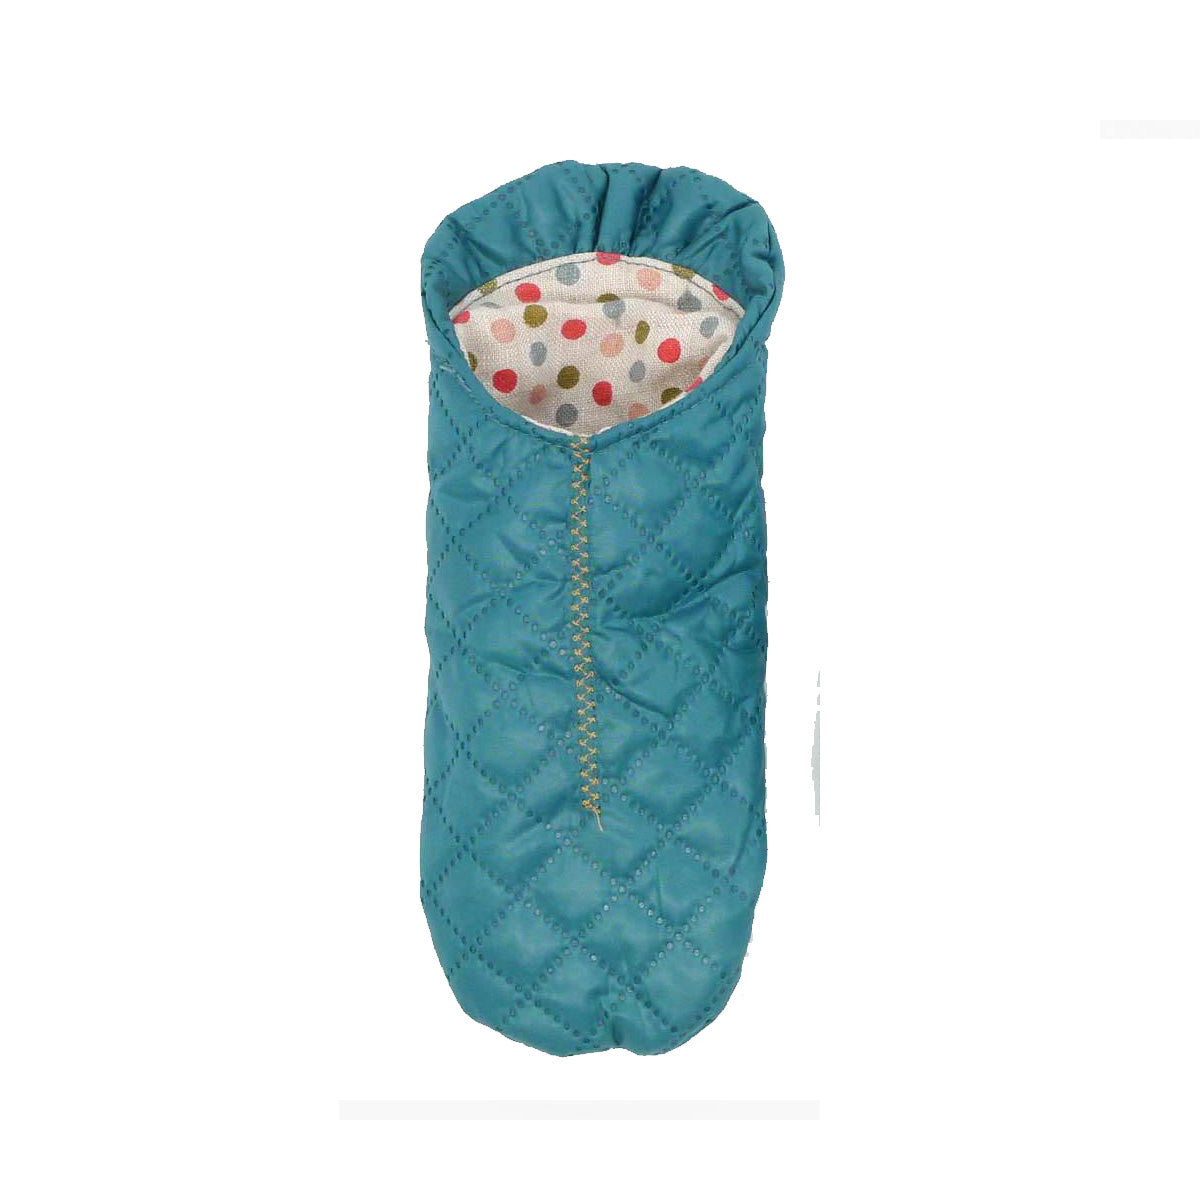 Maileg Mouse Sleeping Bags - Red or Green